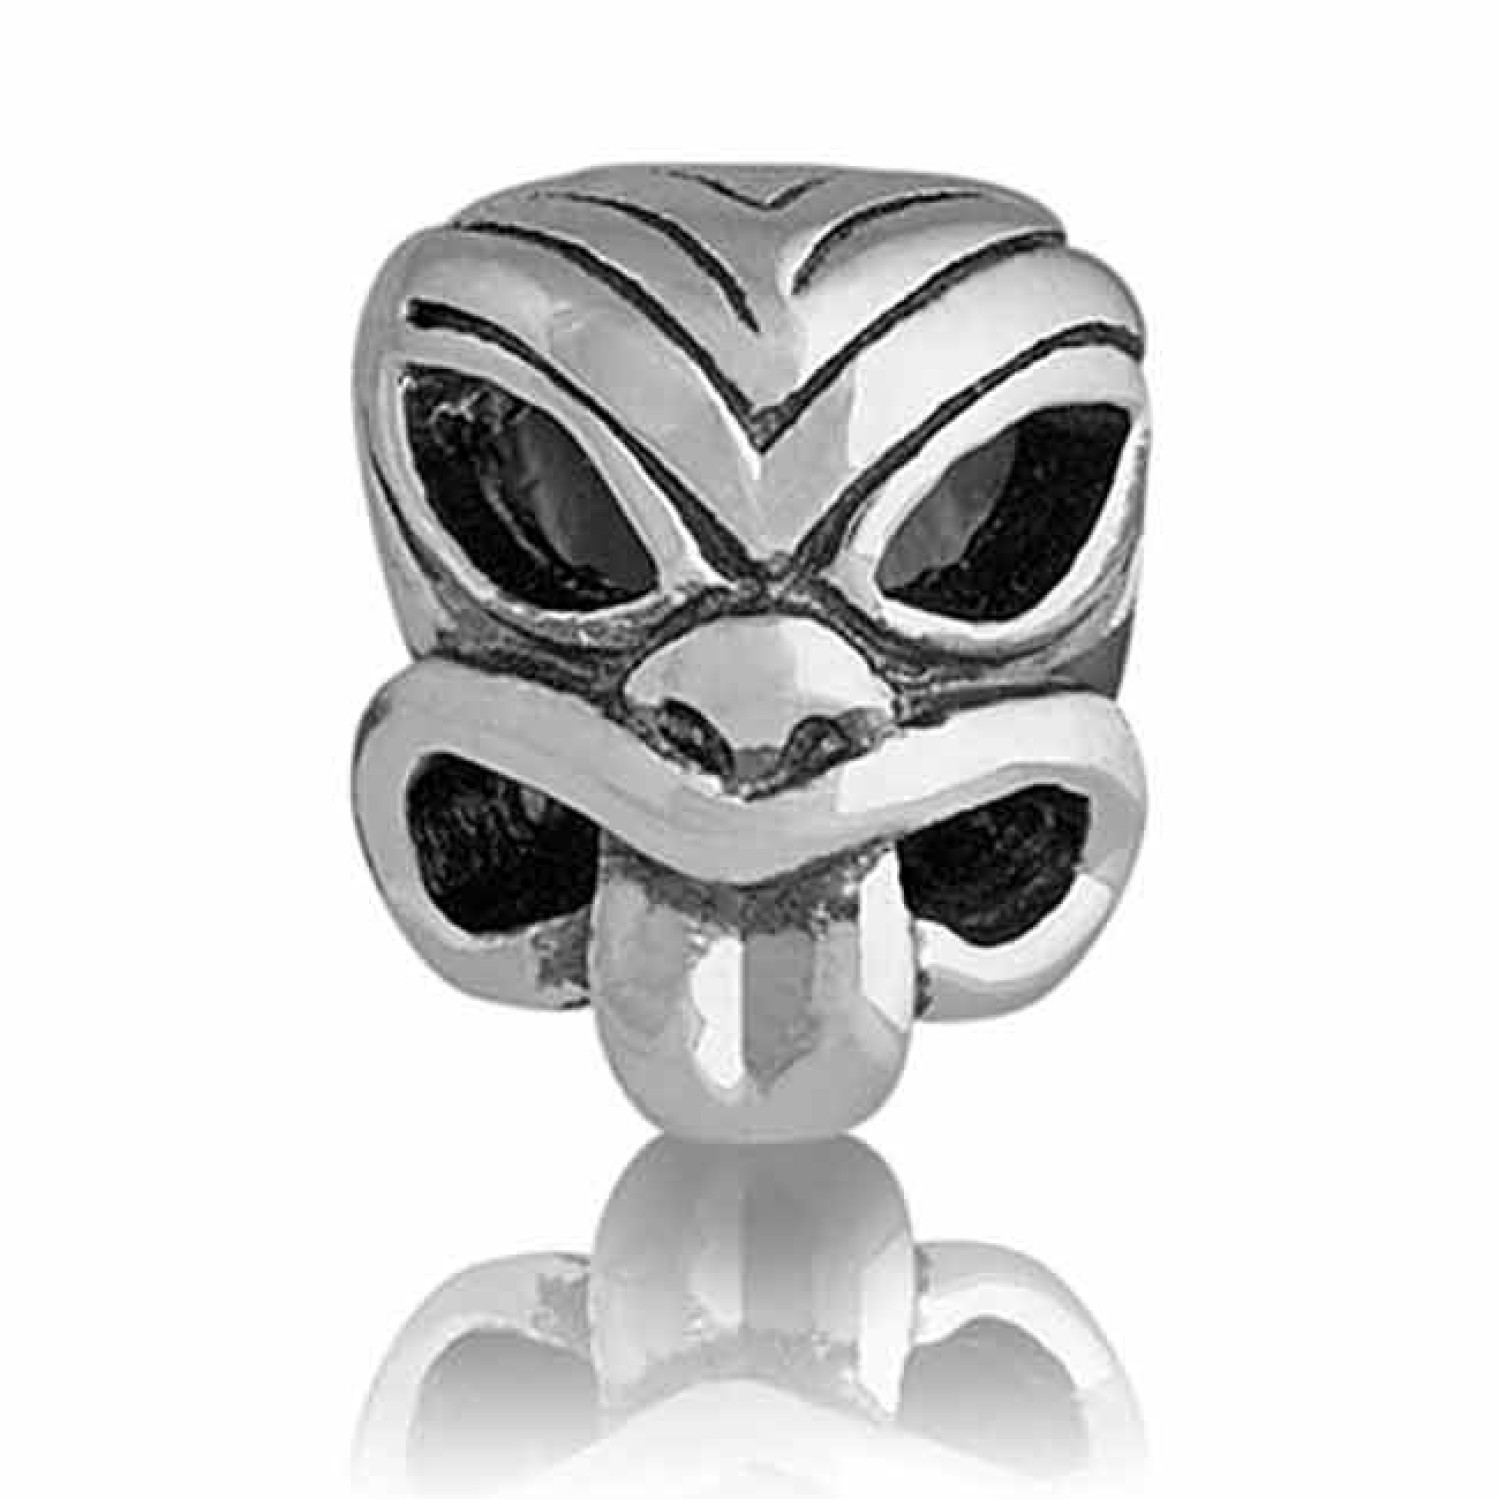 LK014 Evolve  NZ Pacific Mask. LK014 Evolve Silver Charm NZ Pacific Mask The mask is used to keep guard over the Maori meeting house or wharenui and protect those within. The mask challenges the enemy and shows unrelenting determination to protect the @ch